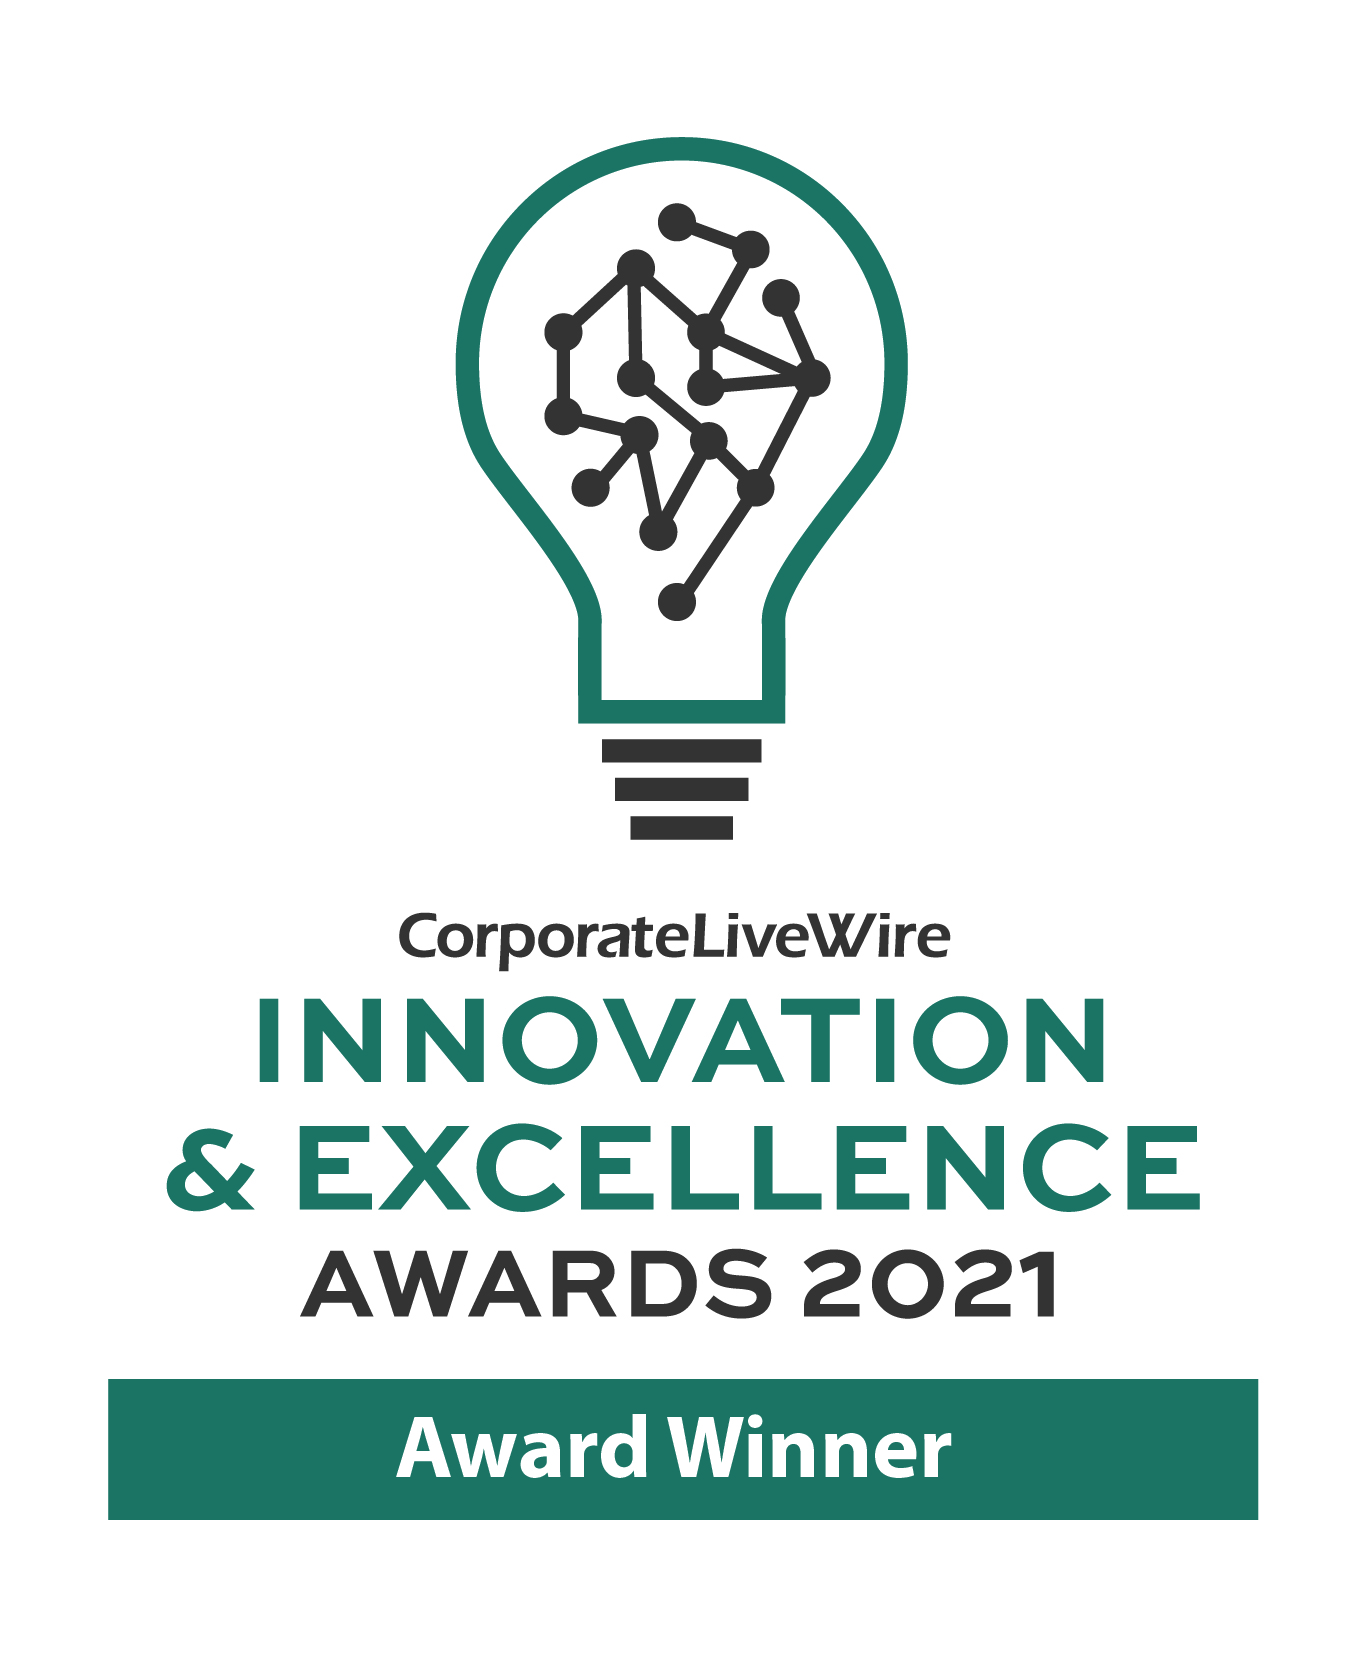 Innovation & Excellence Awards 2021